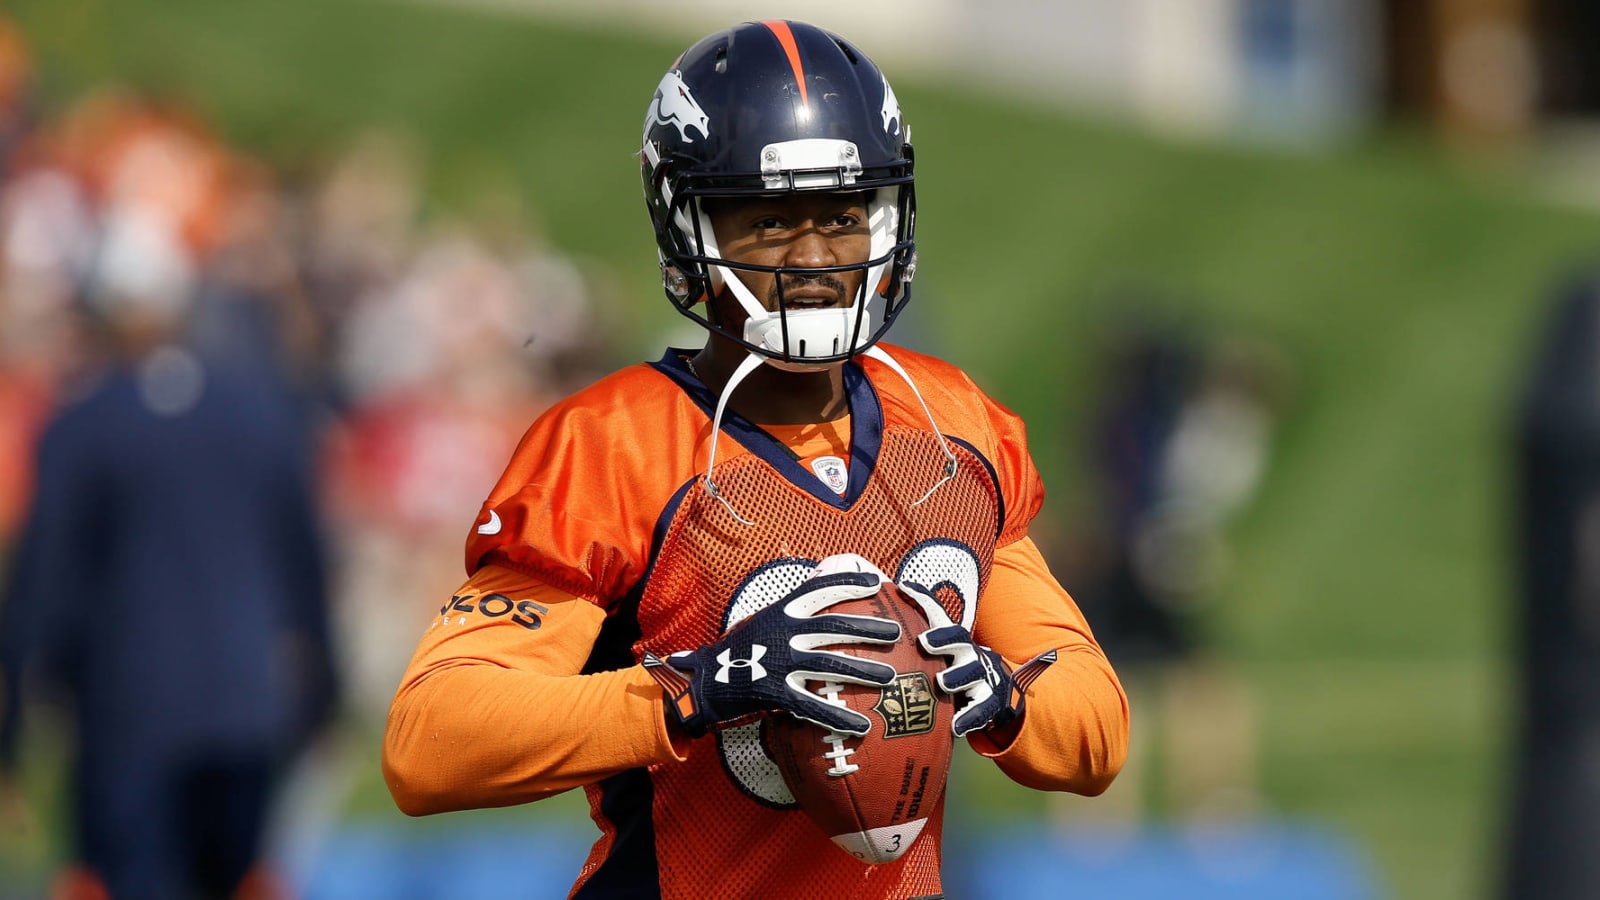 Demaryius Thomas believed to have died from seizure